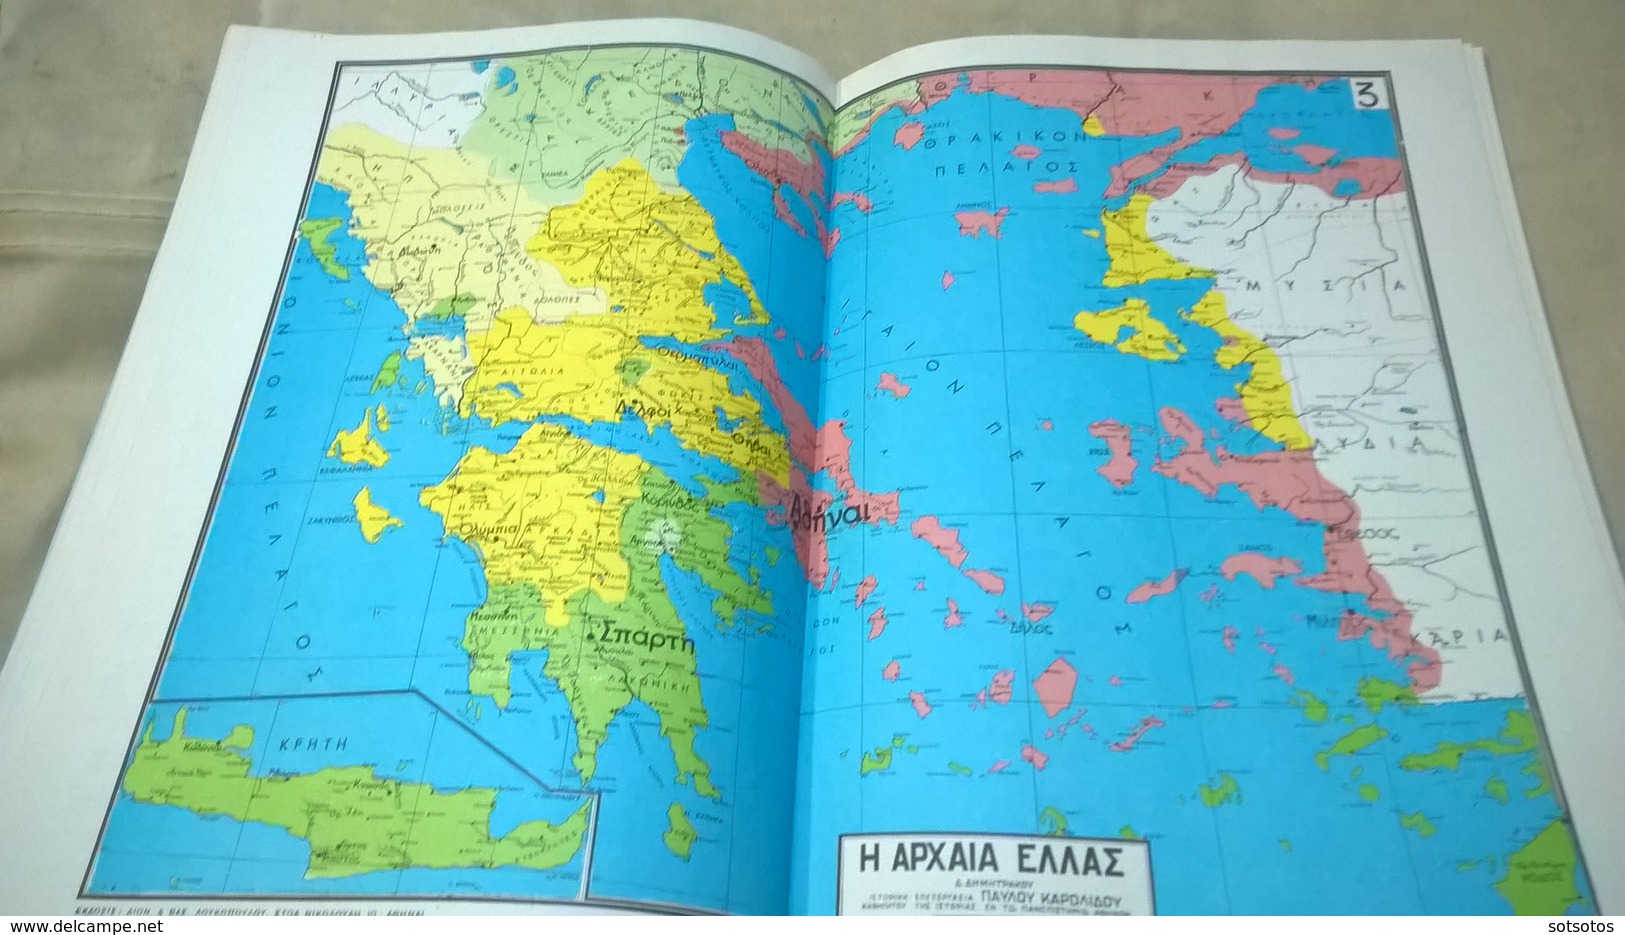 HISTORICAL ATLAS (issue Α’): with 7 big maps 1.- Minoan and Mycenaic Greece- 2.-Ancient Greece and Colonies – 3,3a.- Anc